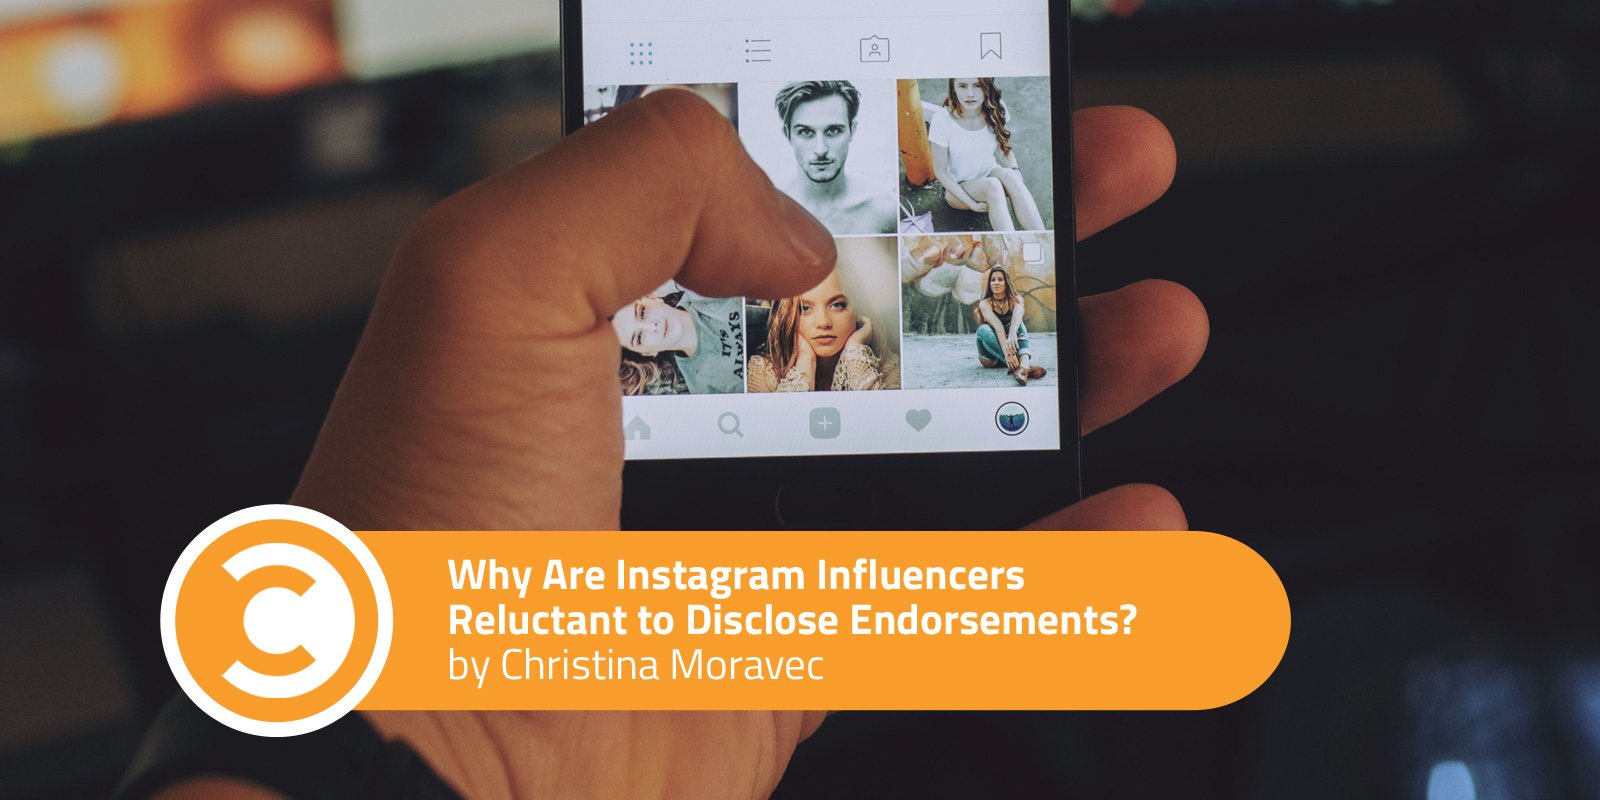 Why Are Instagram Influencers Reluctant to Disclose Endorsements